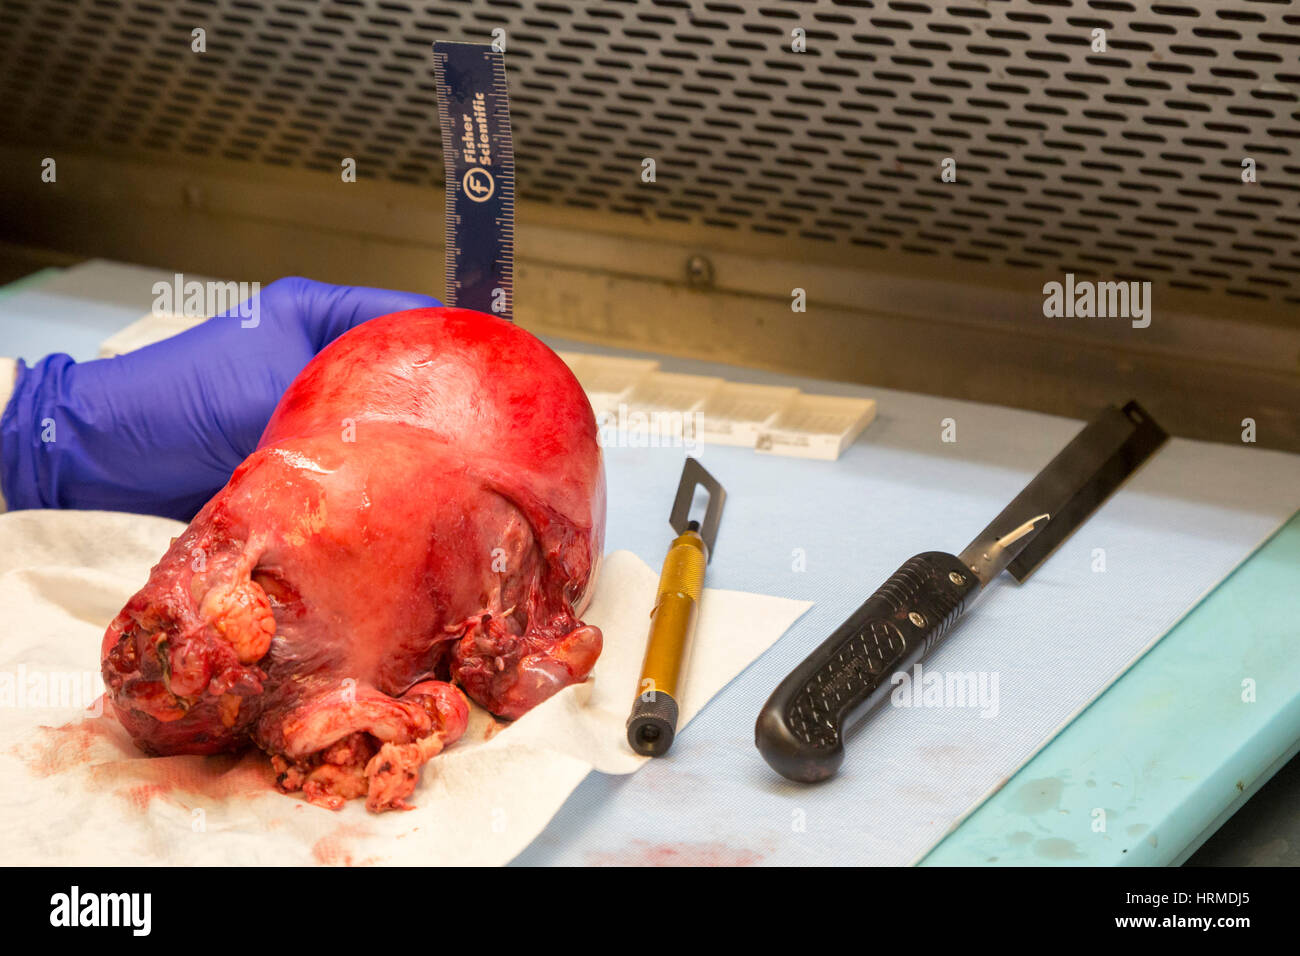 Detroit, Michigan - A pathology assistant at the Detroit Medical Center examines a uterus with endometrial adenocarcinoma. Stock Photo